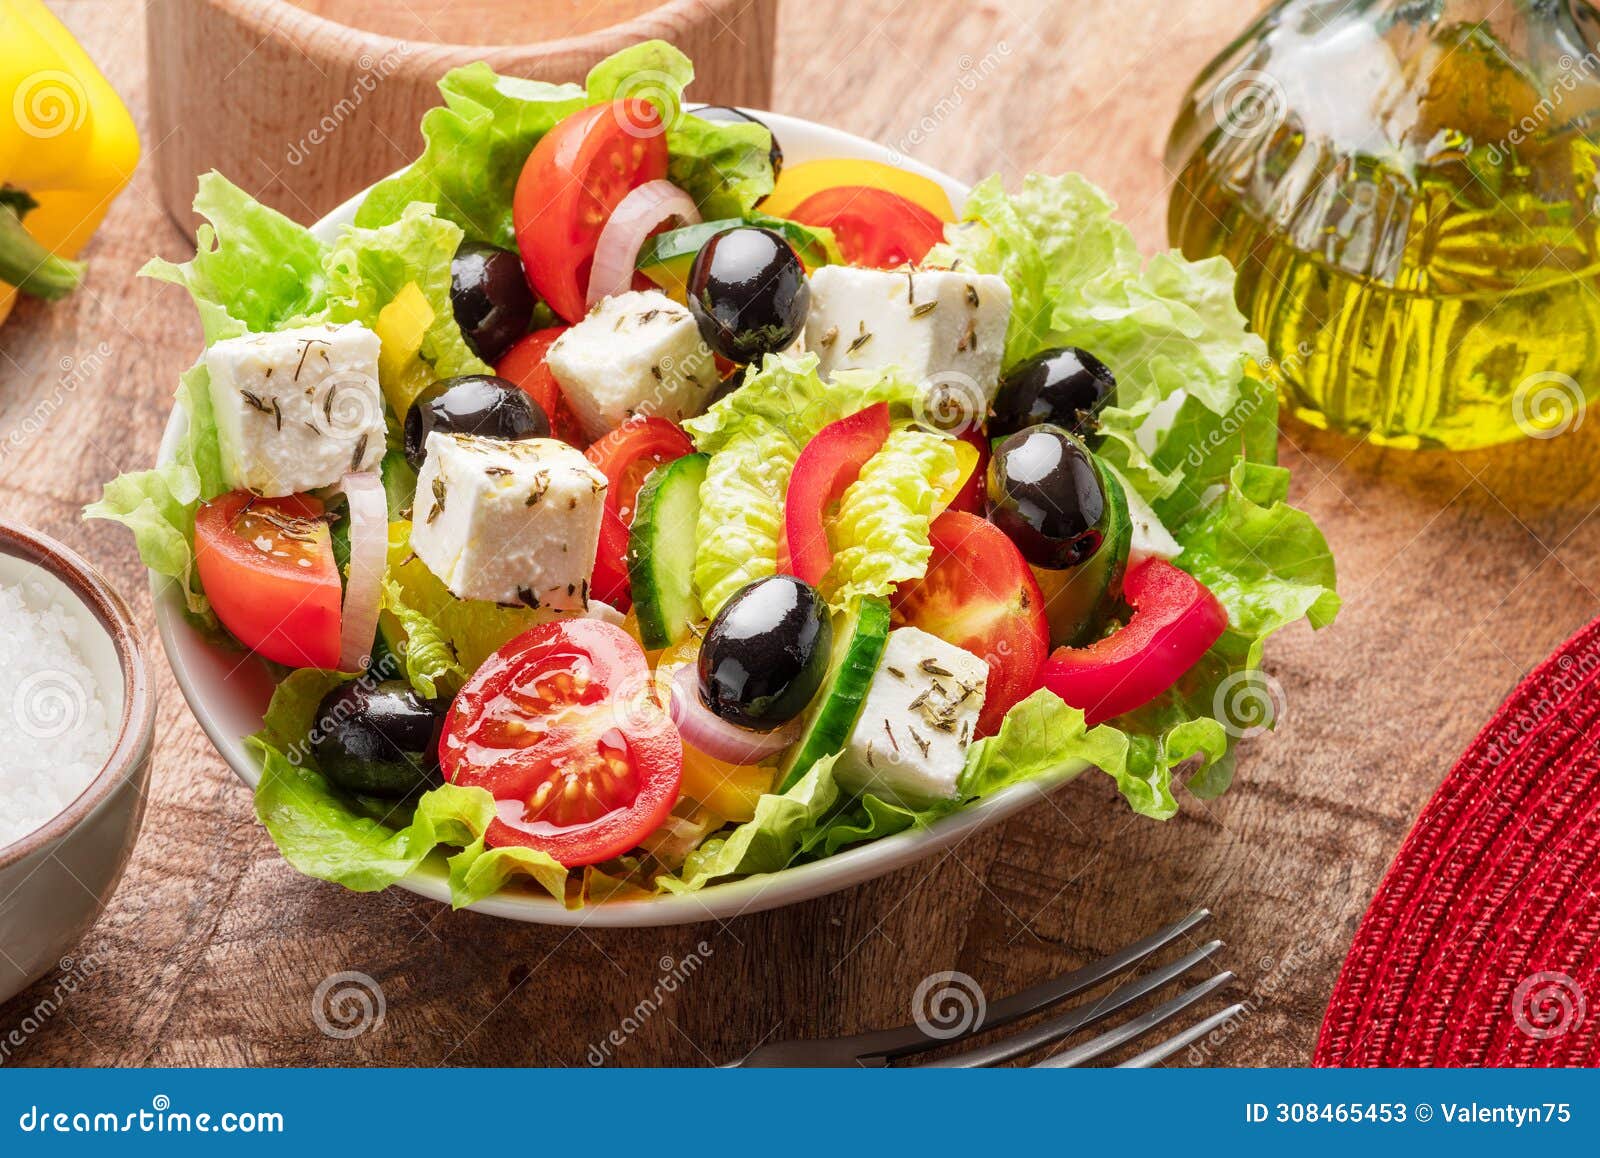 greek salad on wooden table served and ready to eat